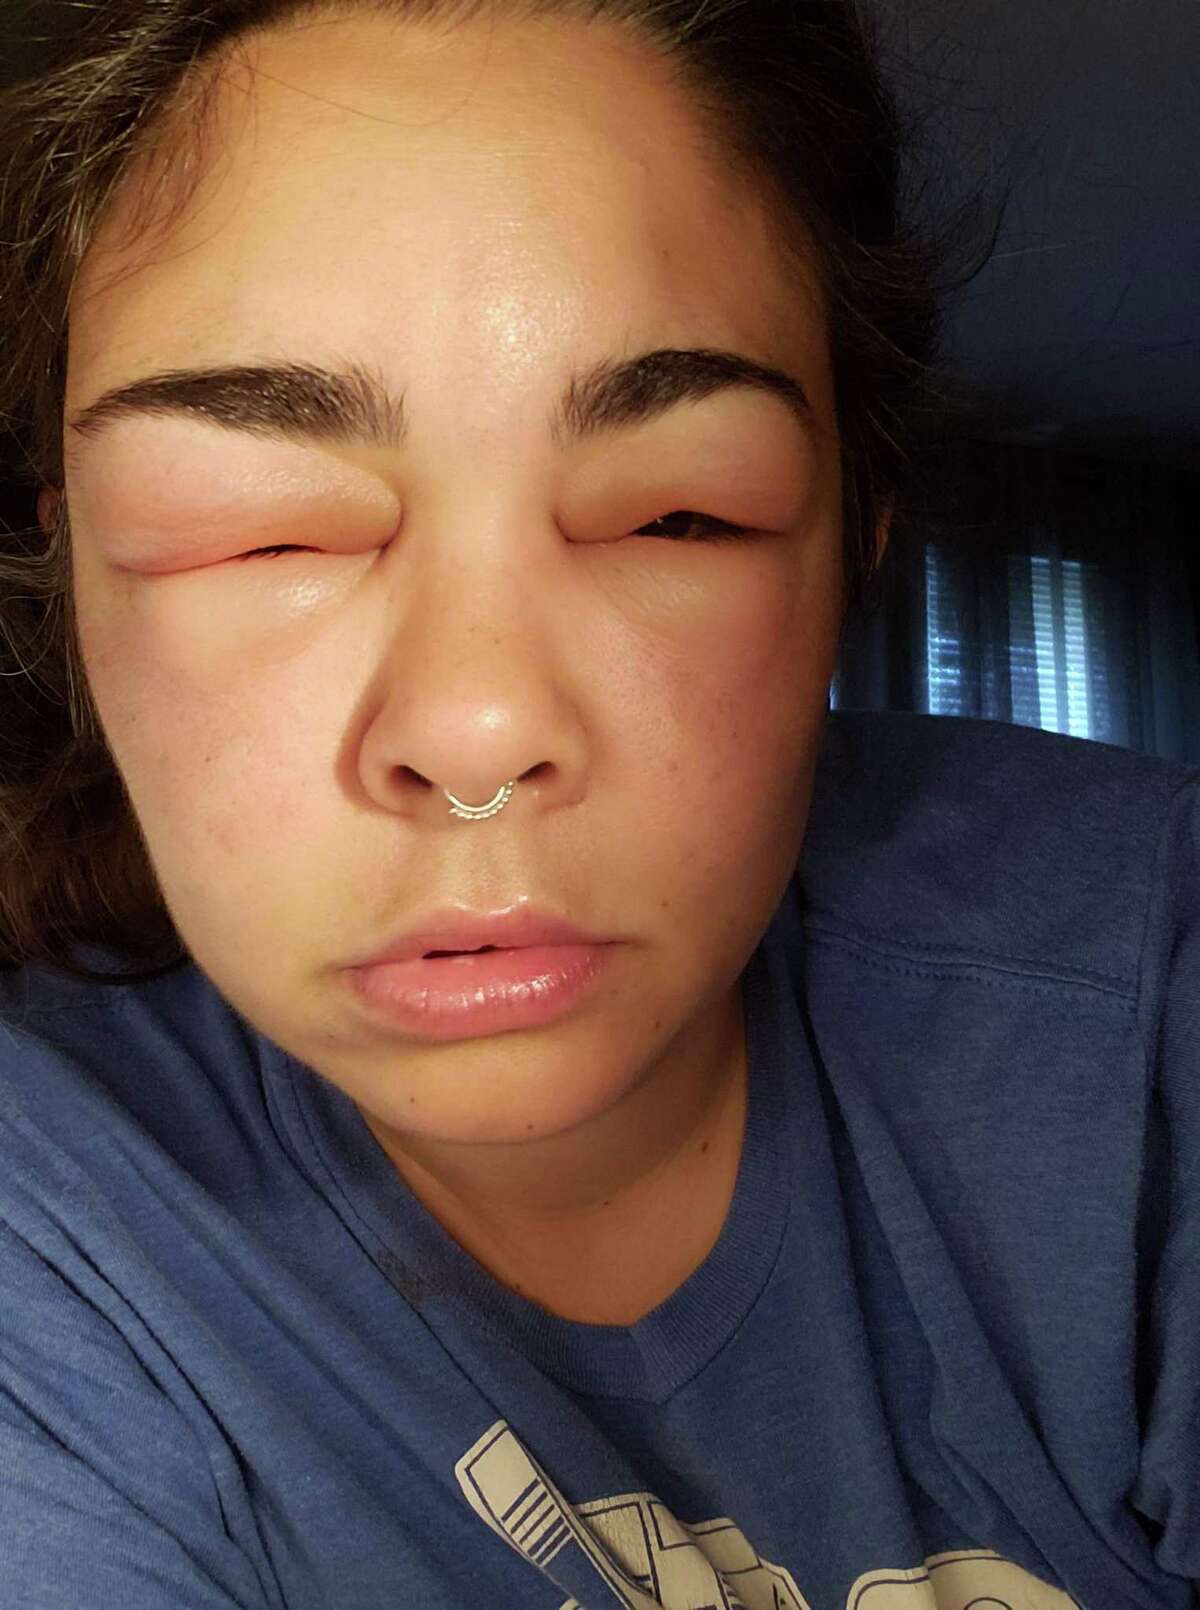 Beekeeper Melissa Marguy of Orange is pictured here about five hours after being stung by a bee on her forehead. Marguy has continued in the hobby/small business despite the pain and swelling. She now has an EpiPen close at hand and wears extra layers of protection.